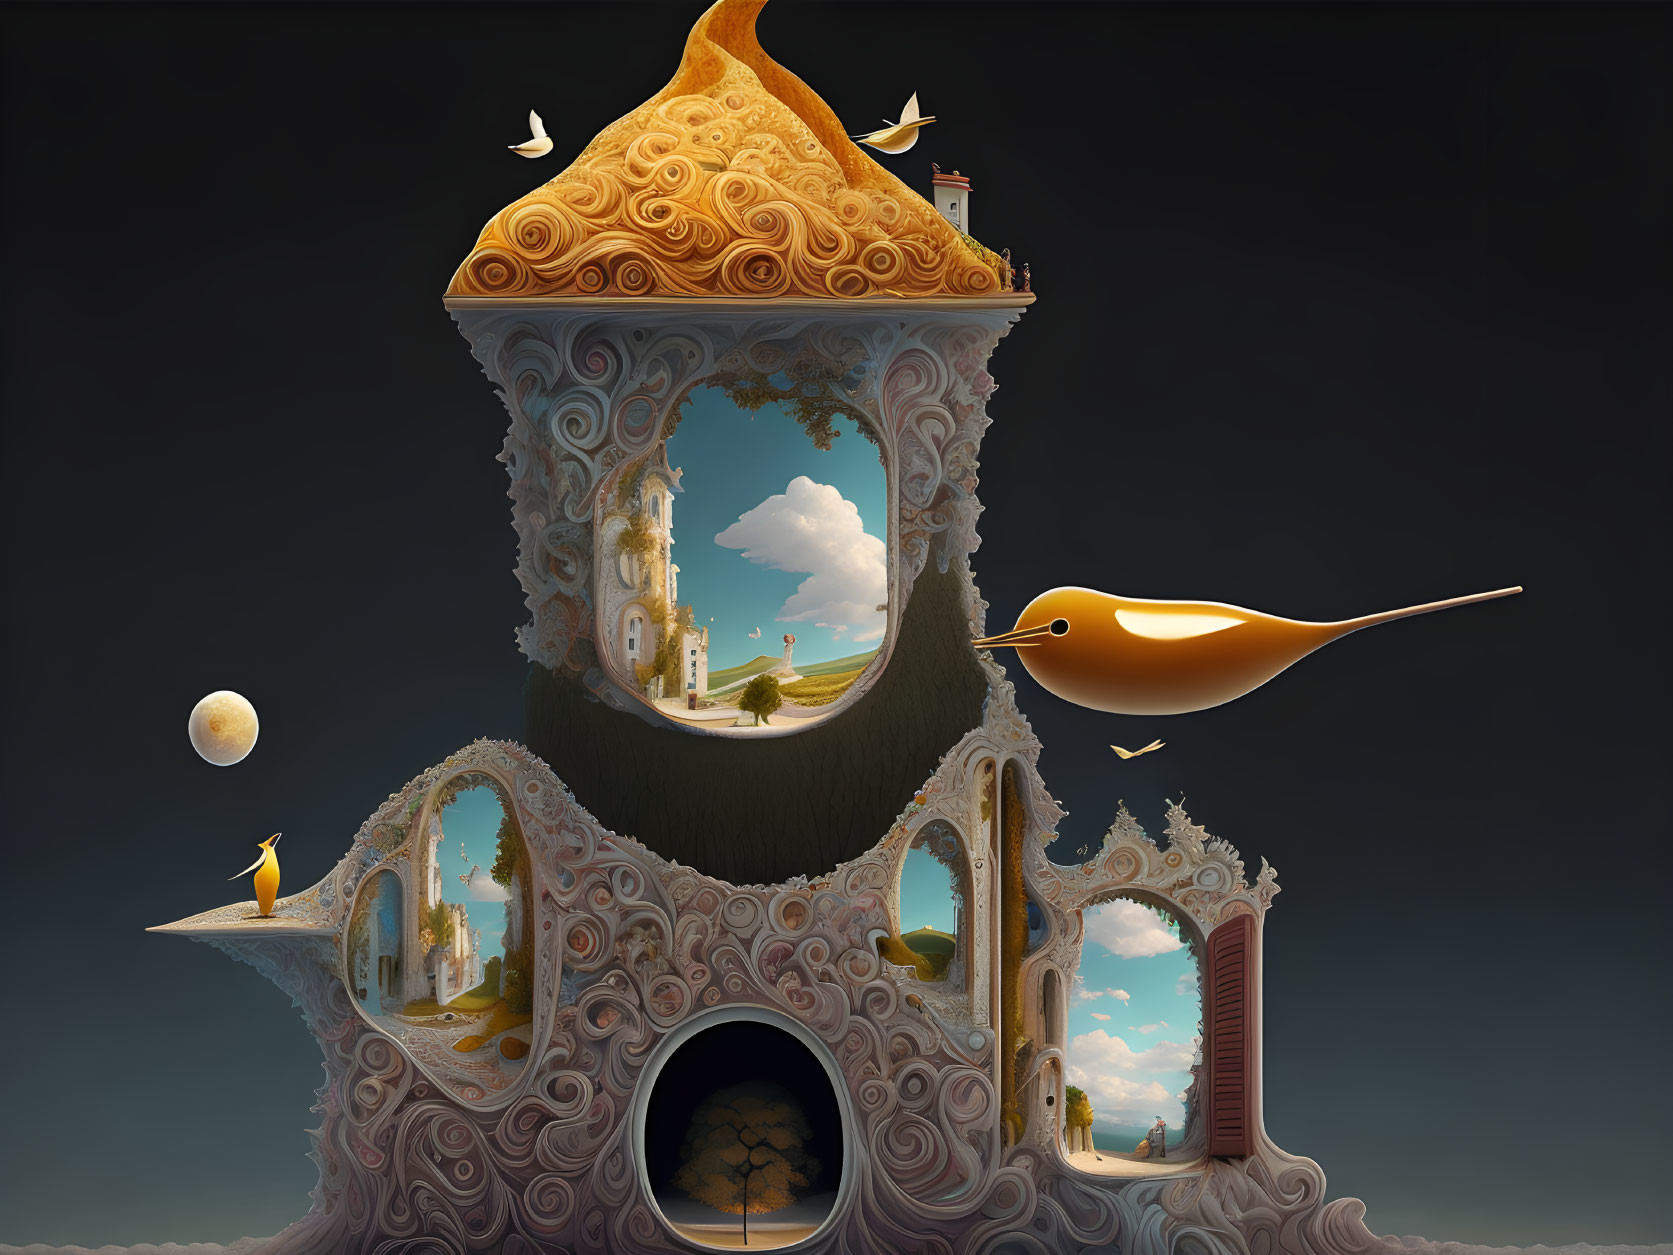 Fantastical surreal tower with bird-like arches in cloudy sky